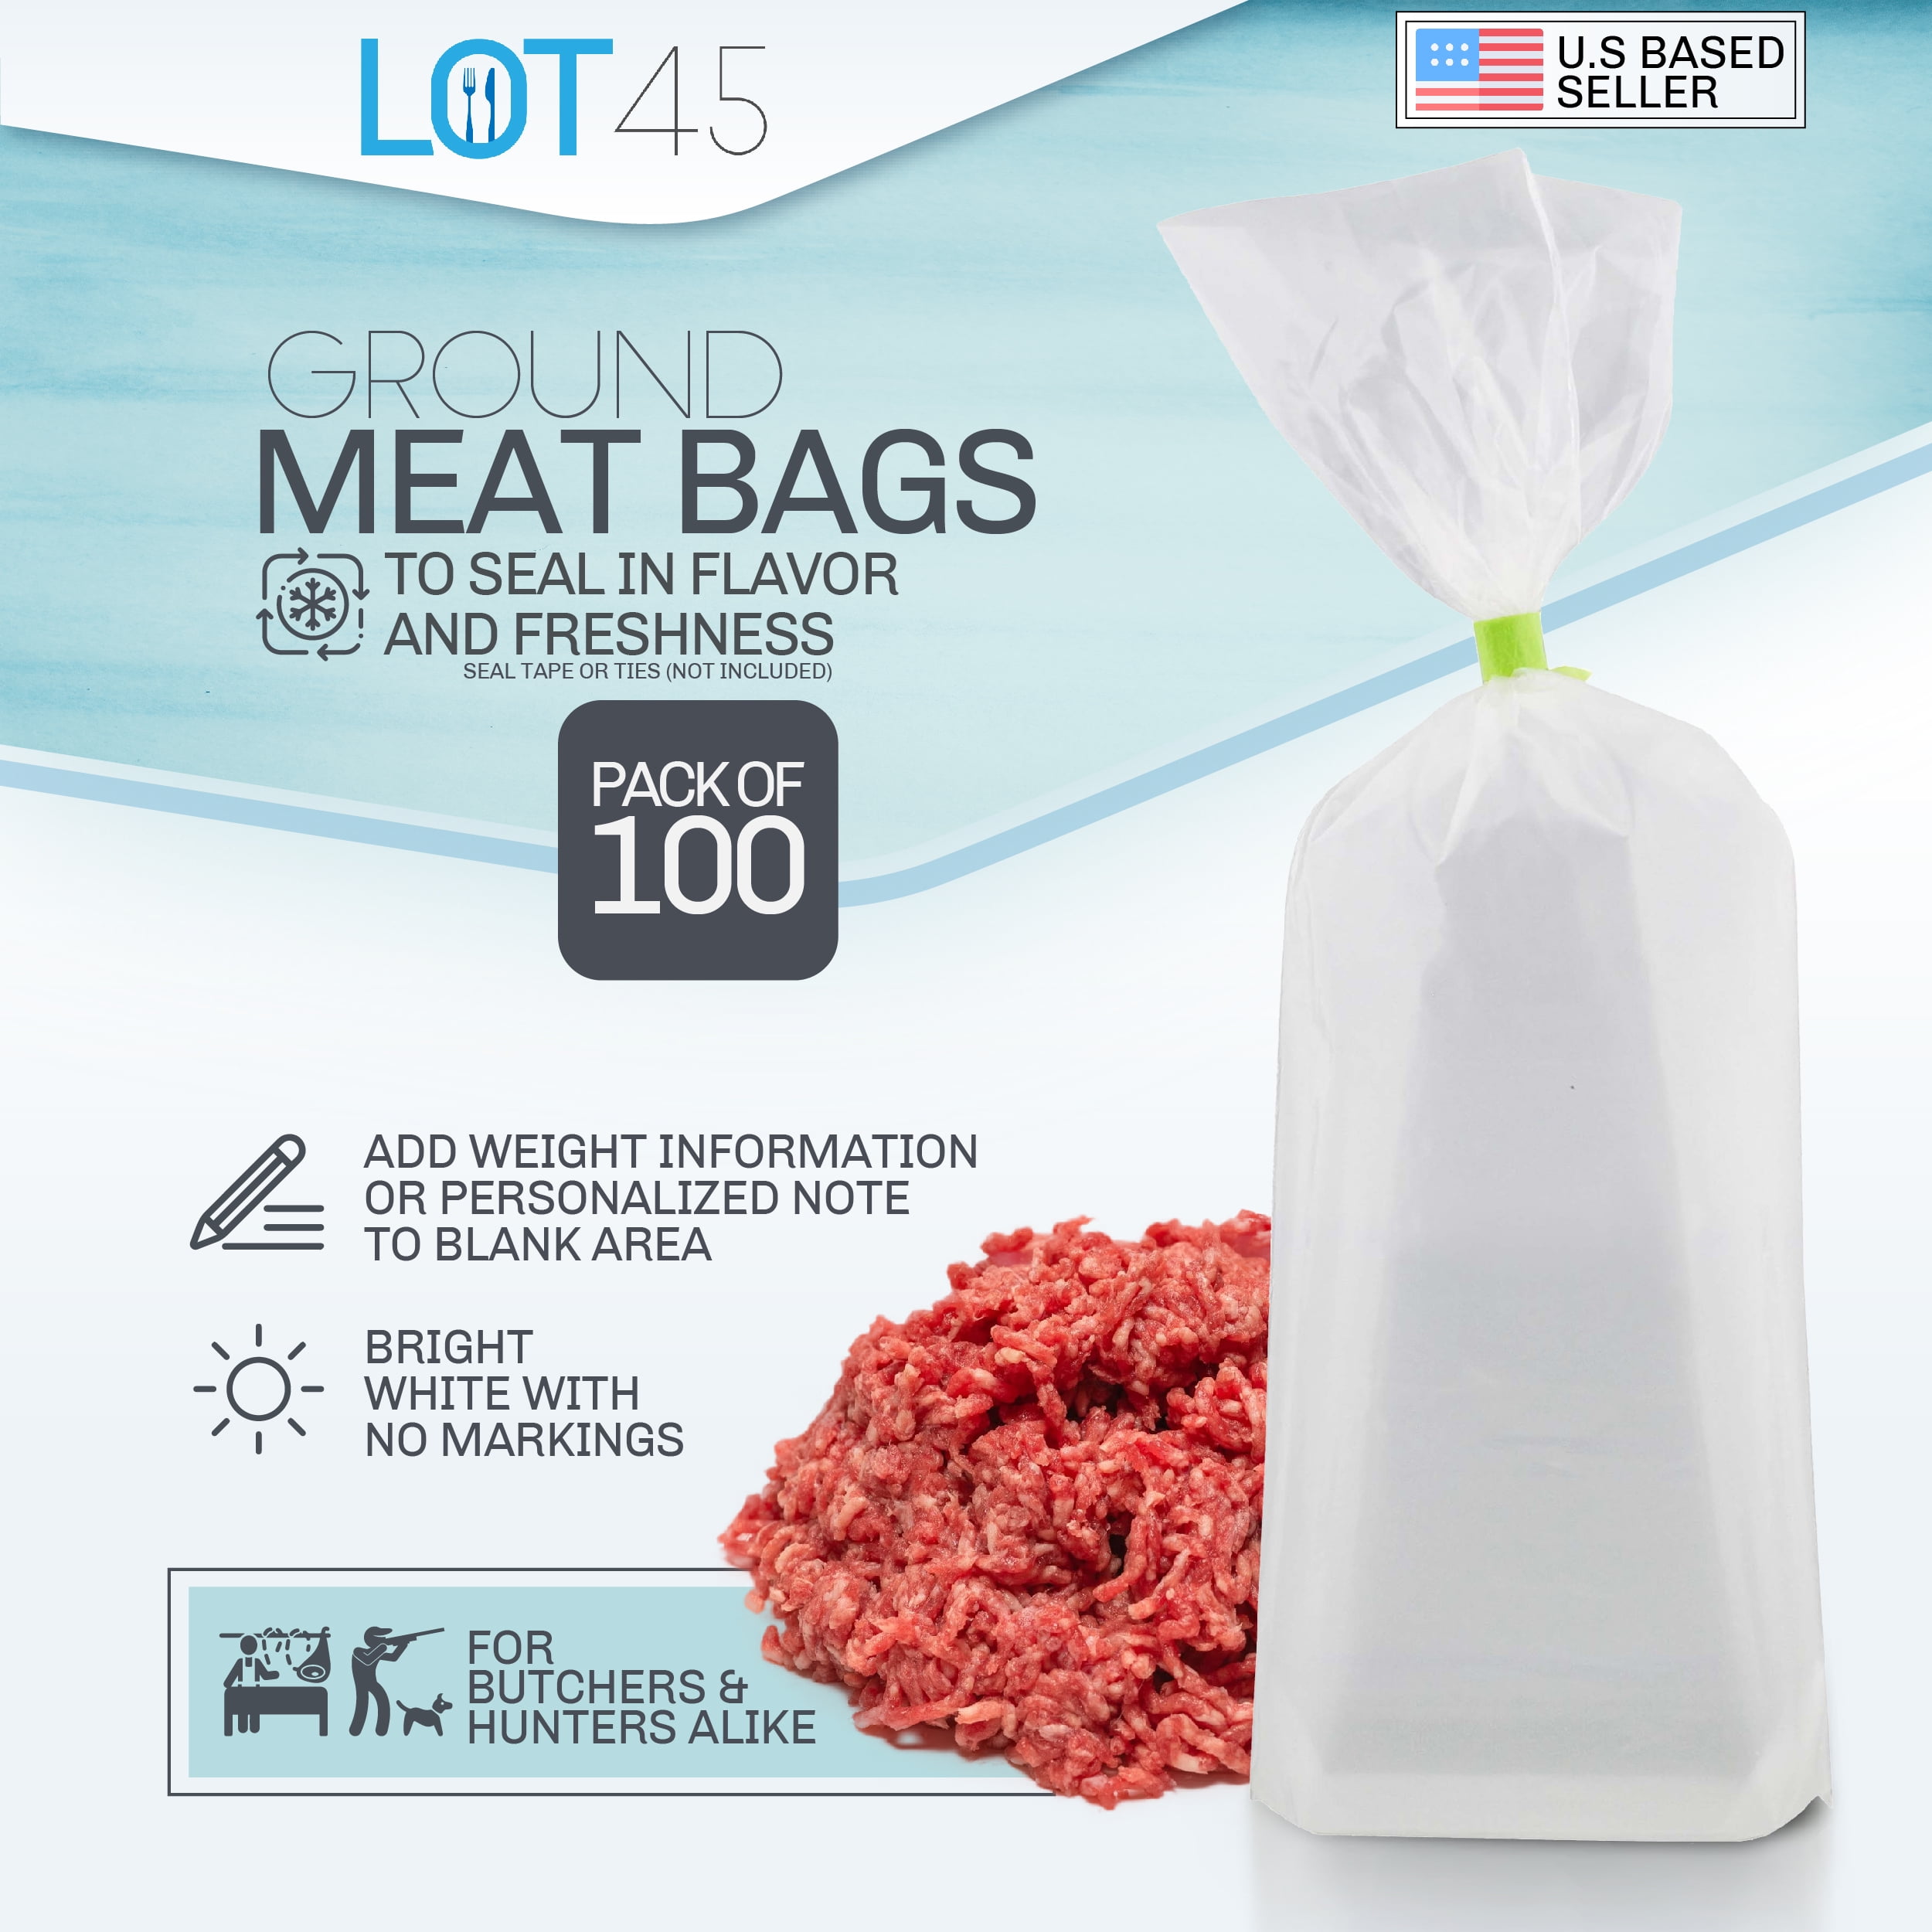 Lot45 Ground Hamburger Bags 1lb - 100pk Clear Wild Game Meat Processing Bags  